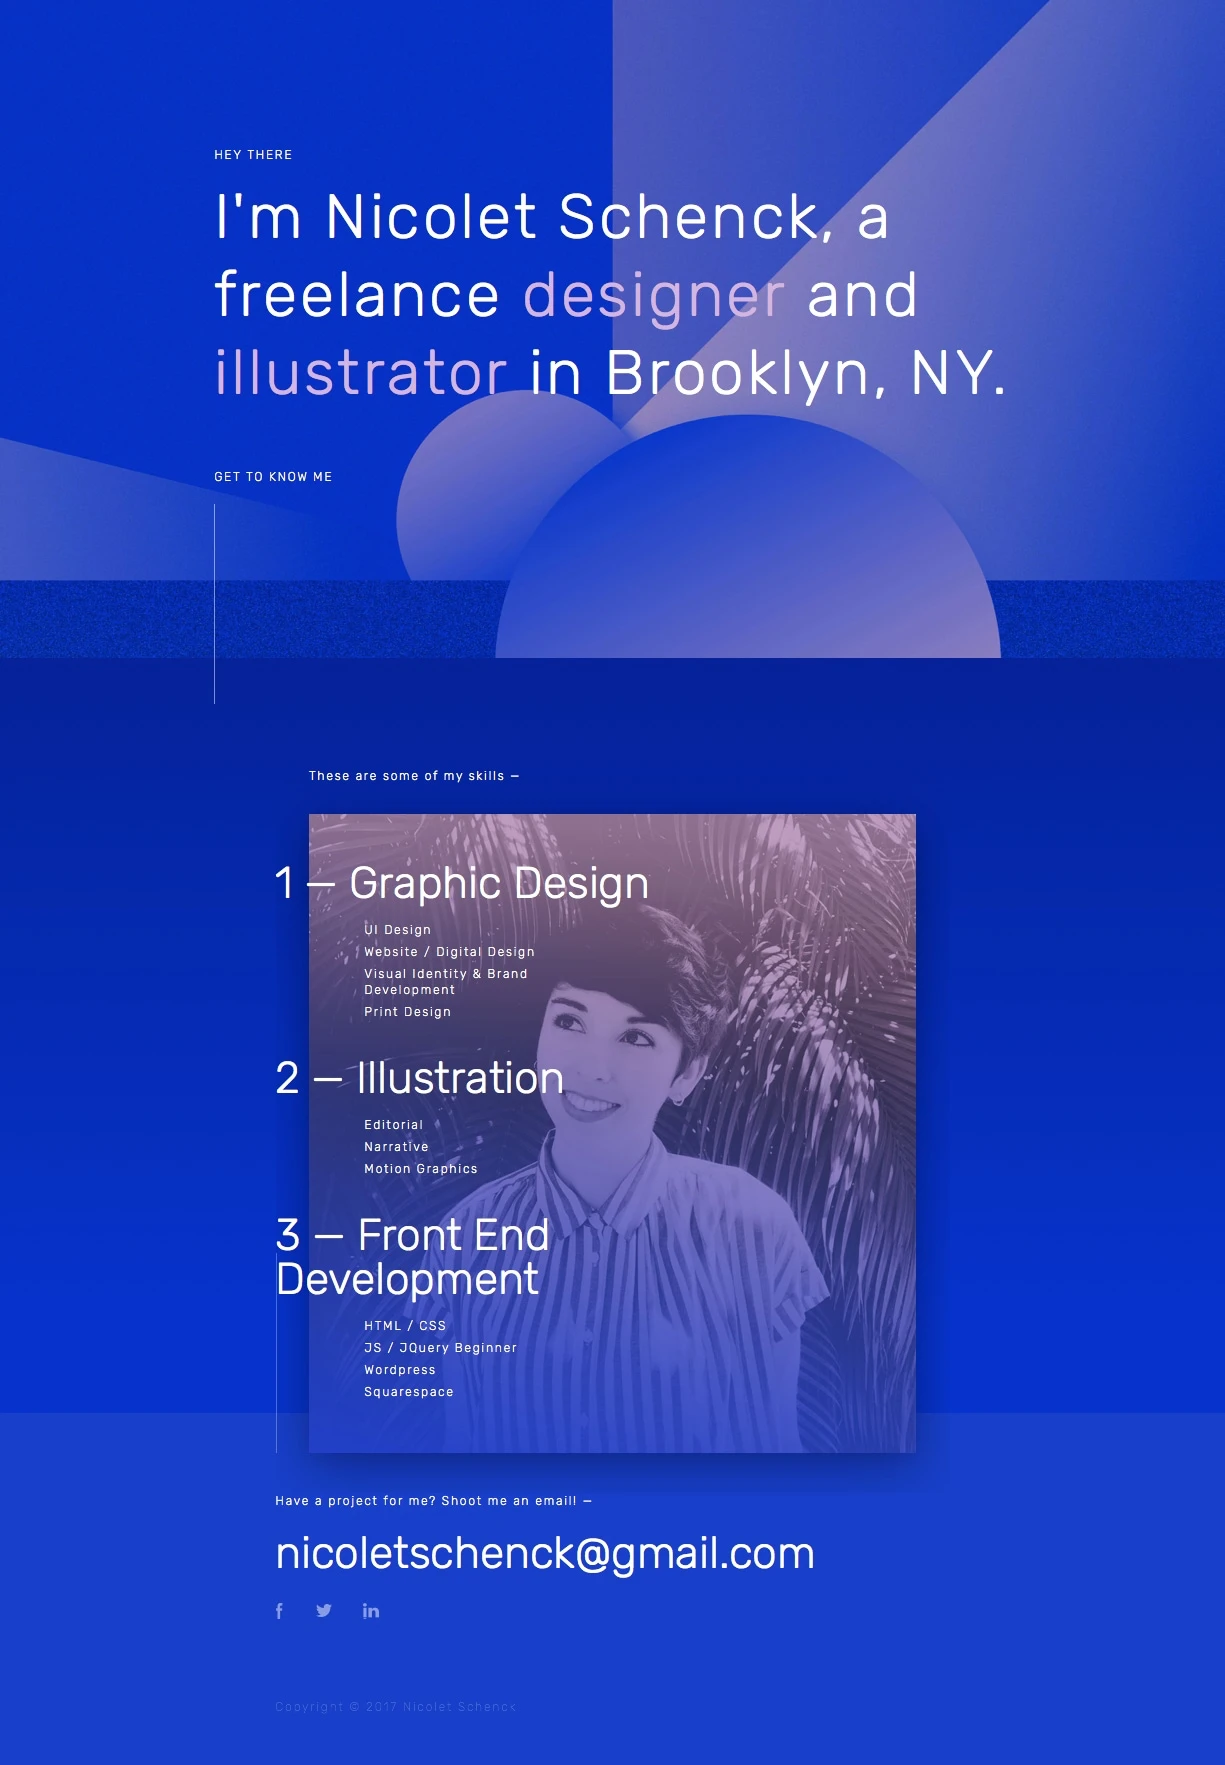 Nicolet Schenck Landing Page Example: A freelance designer and illustrator in Brooklyn, NY.